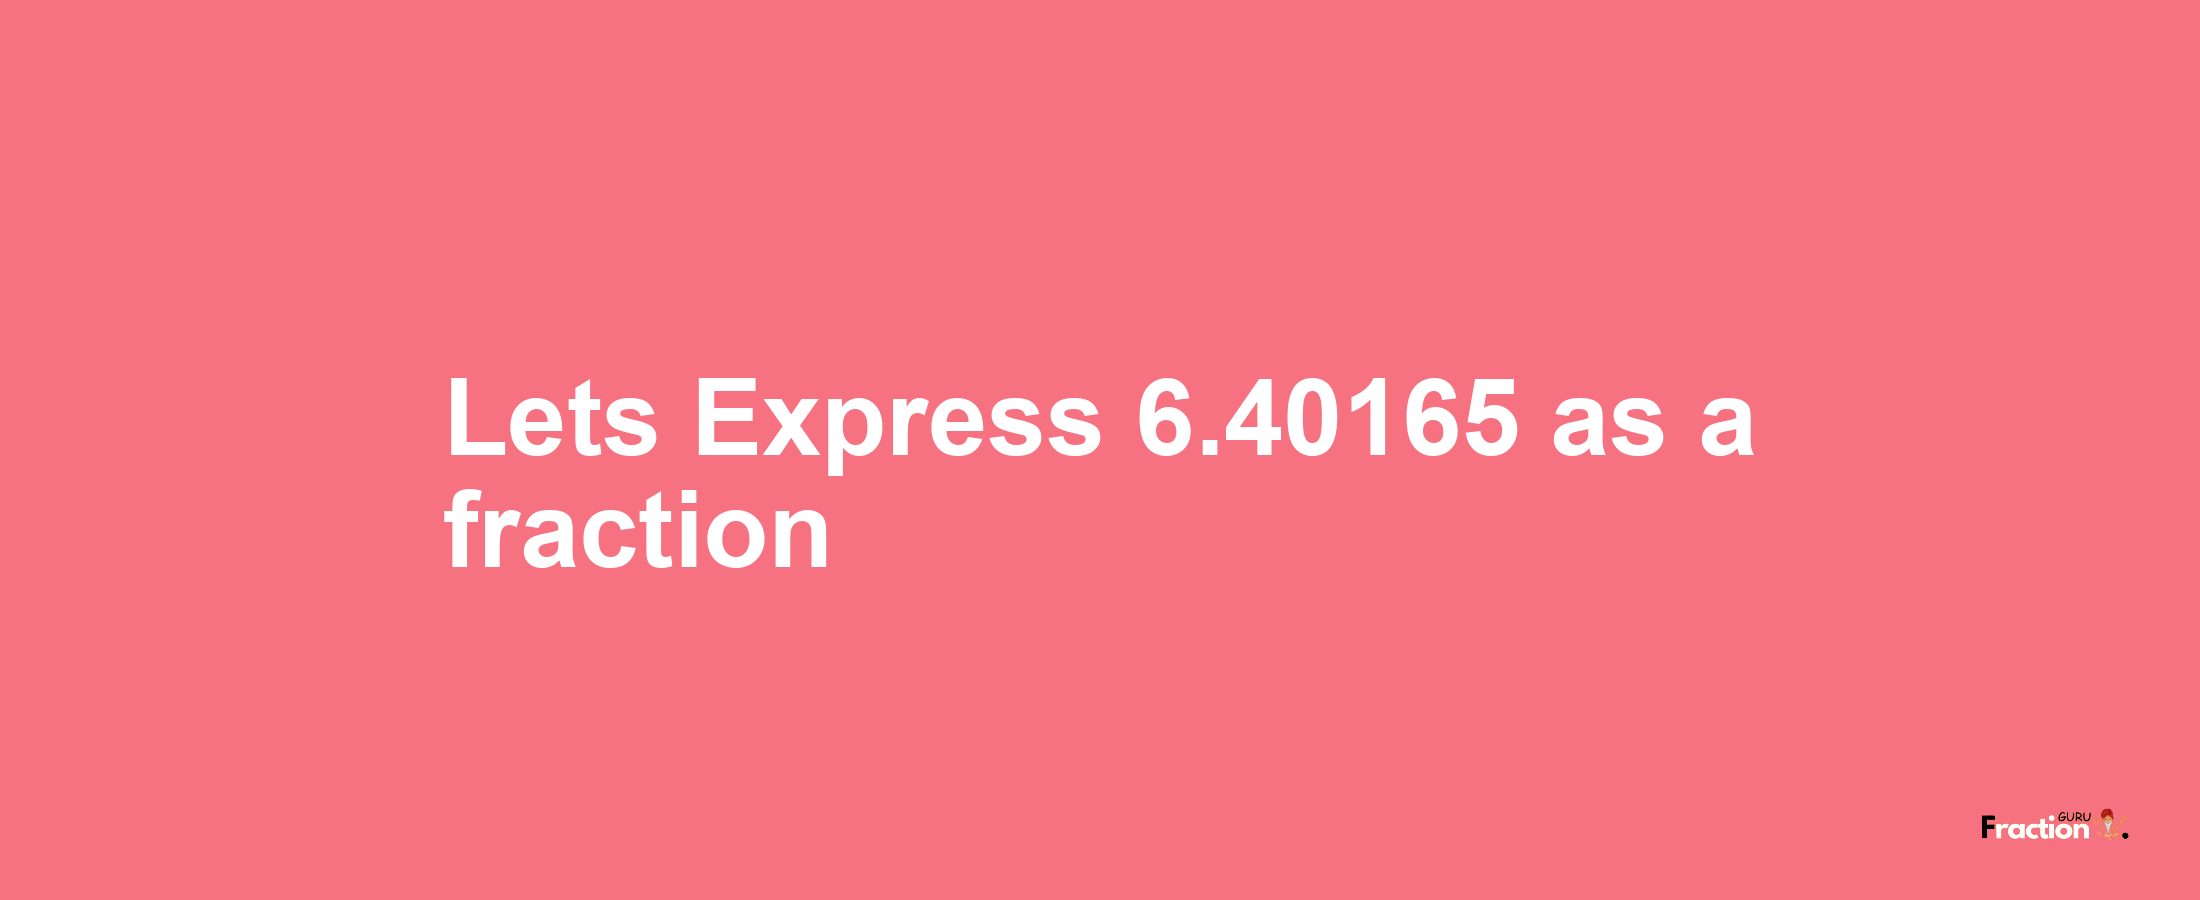 Lets Express 6.40165 as afraction